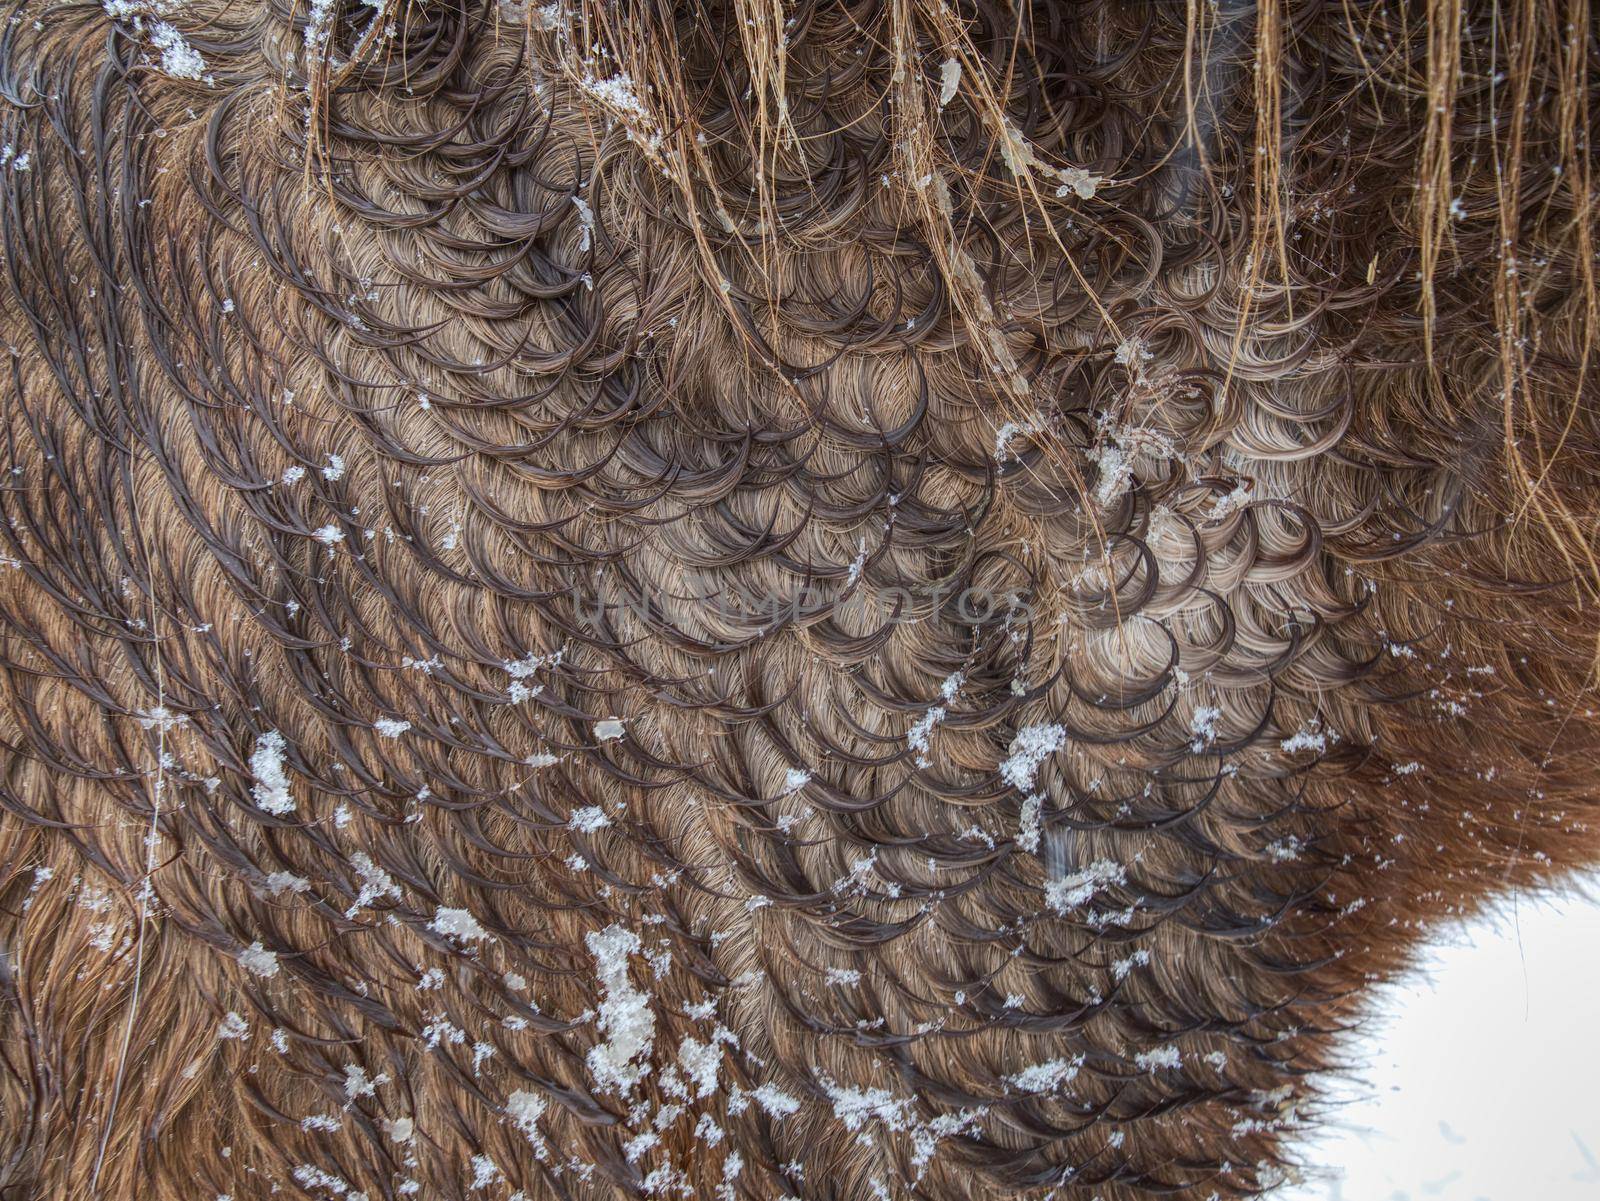 Curly fur rings in winter horse hair. Wet hairs with snow  by rdonar2